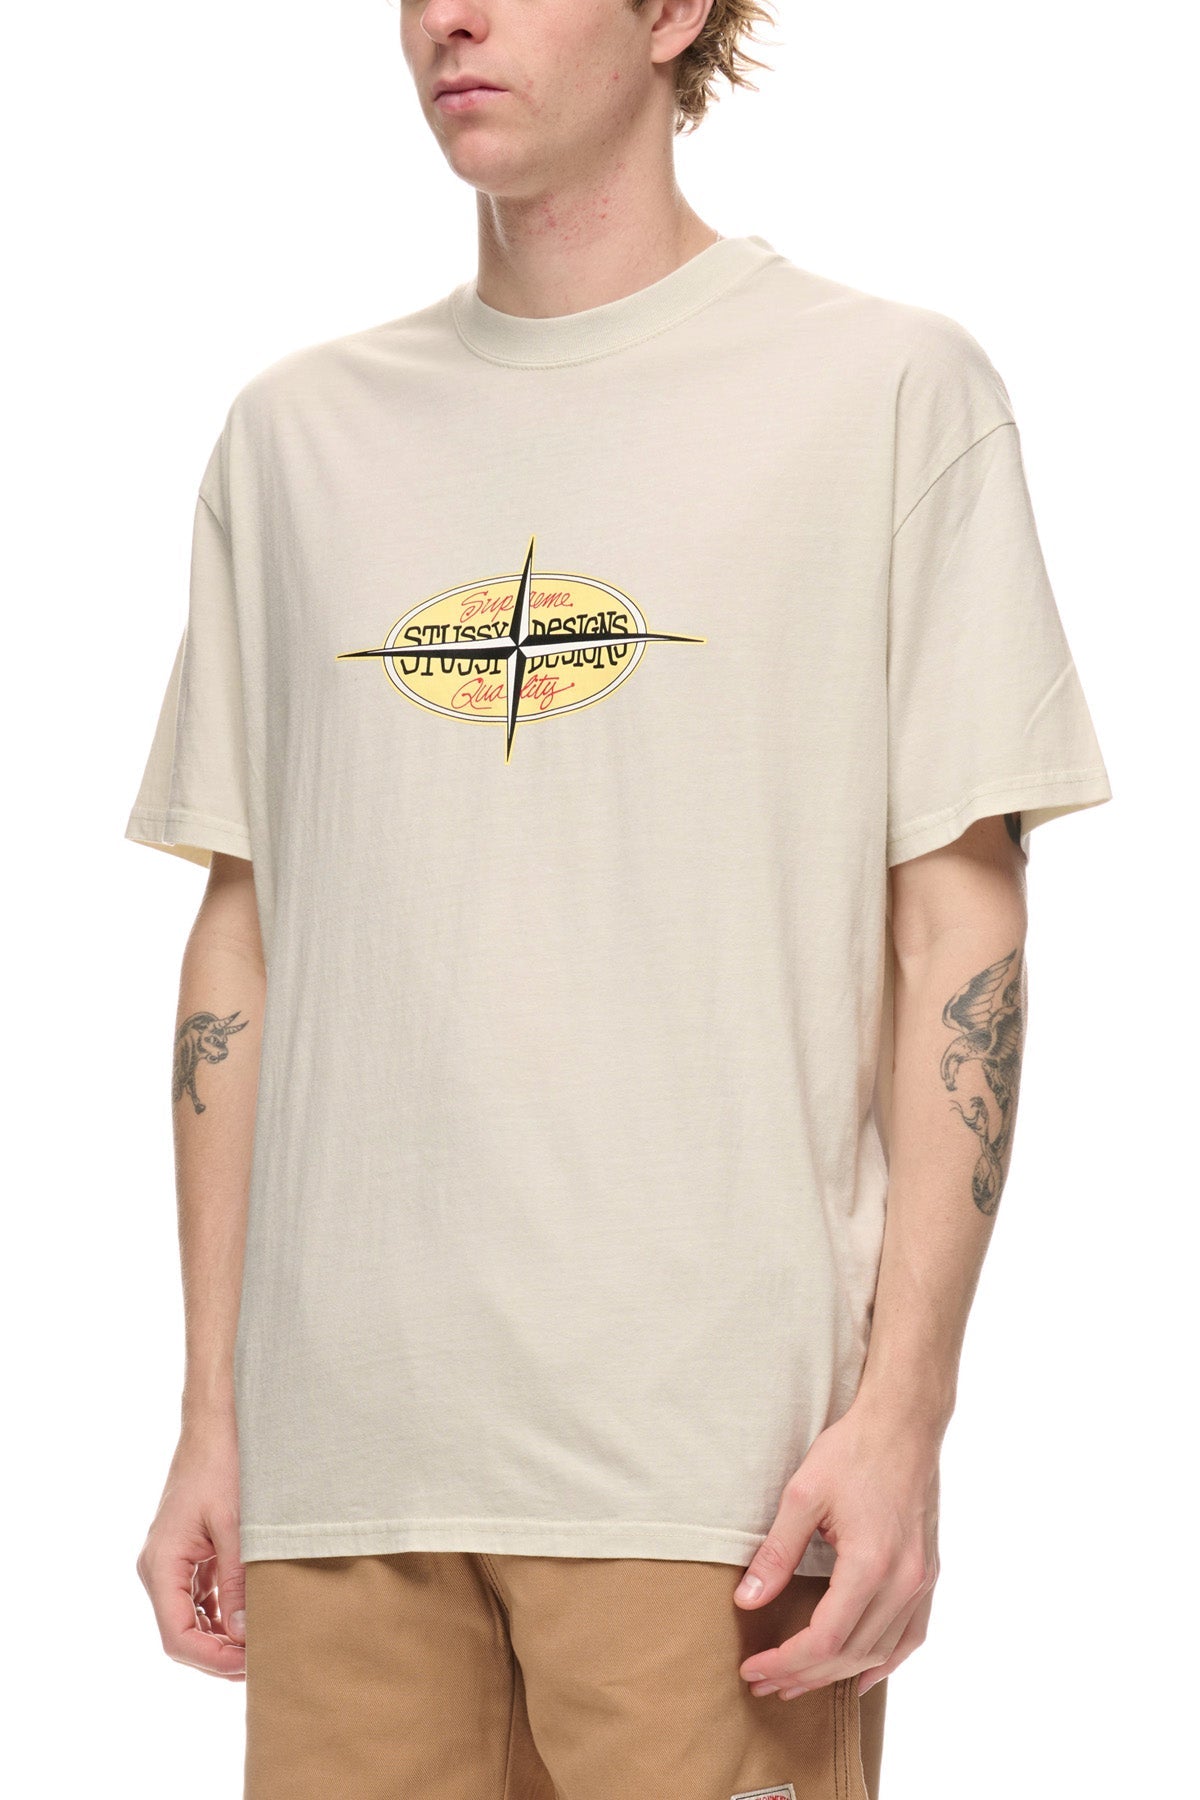 Stussy - points ss tee - pigment washed white